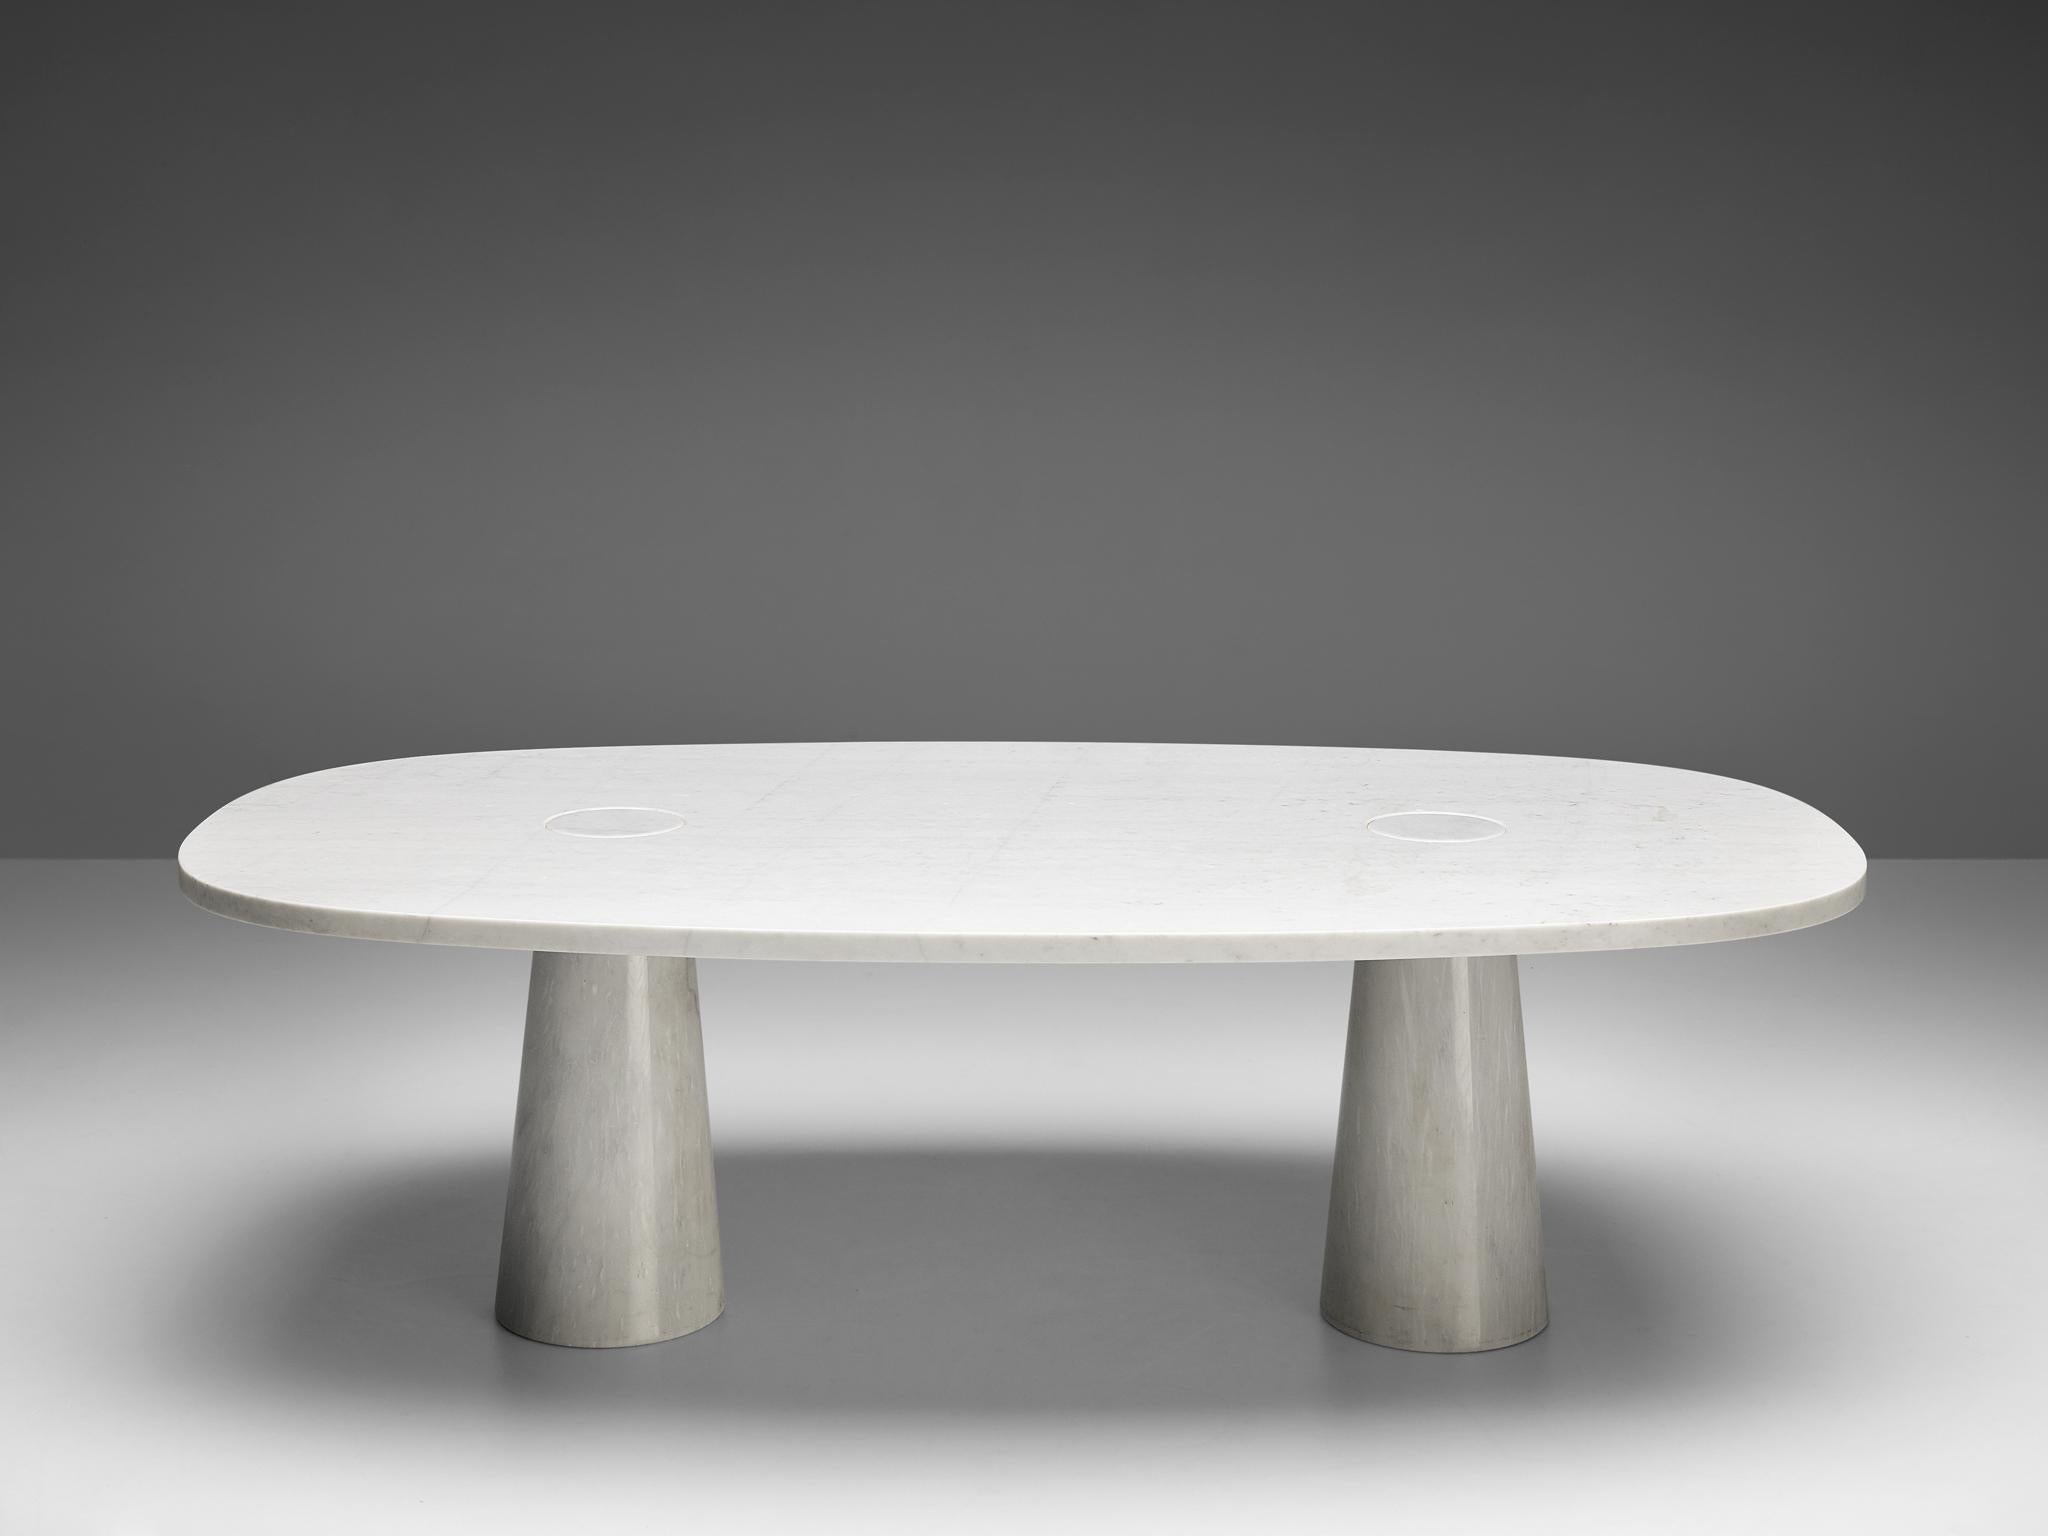 Angelo Mangiarotti, dining table, marble, 1970s.

This sculptural table by Angelo Mangiarotti is a skillful example of postmodern design. The table is executed in white marble. The oval table features no joints or clamps and is architectural in